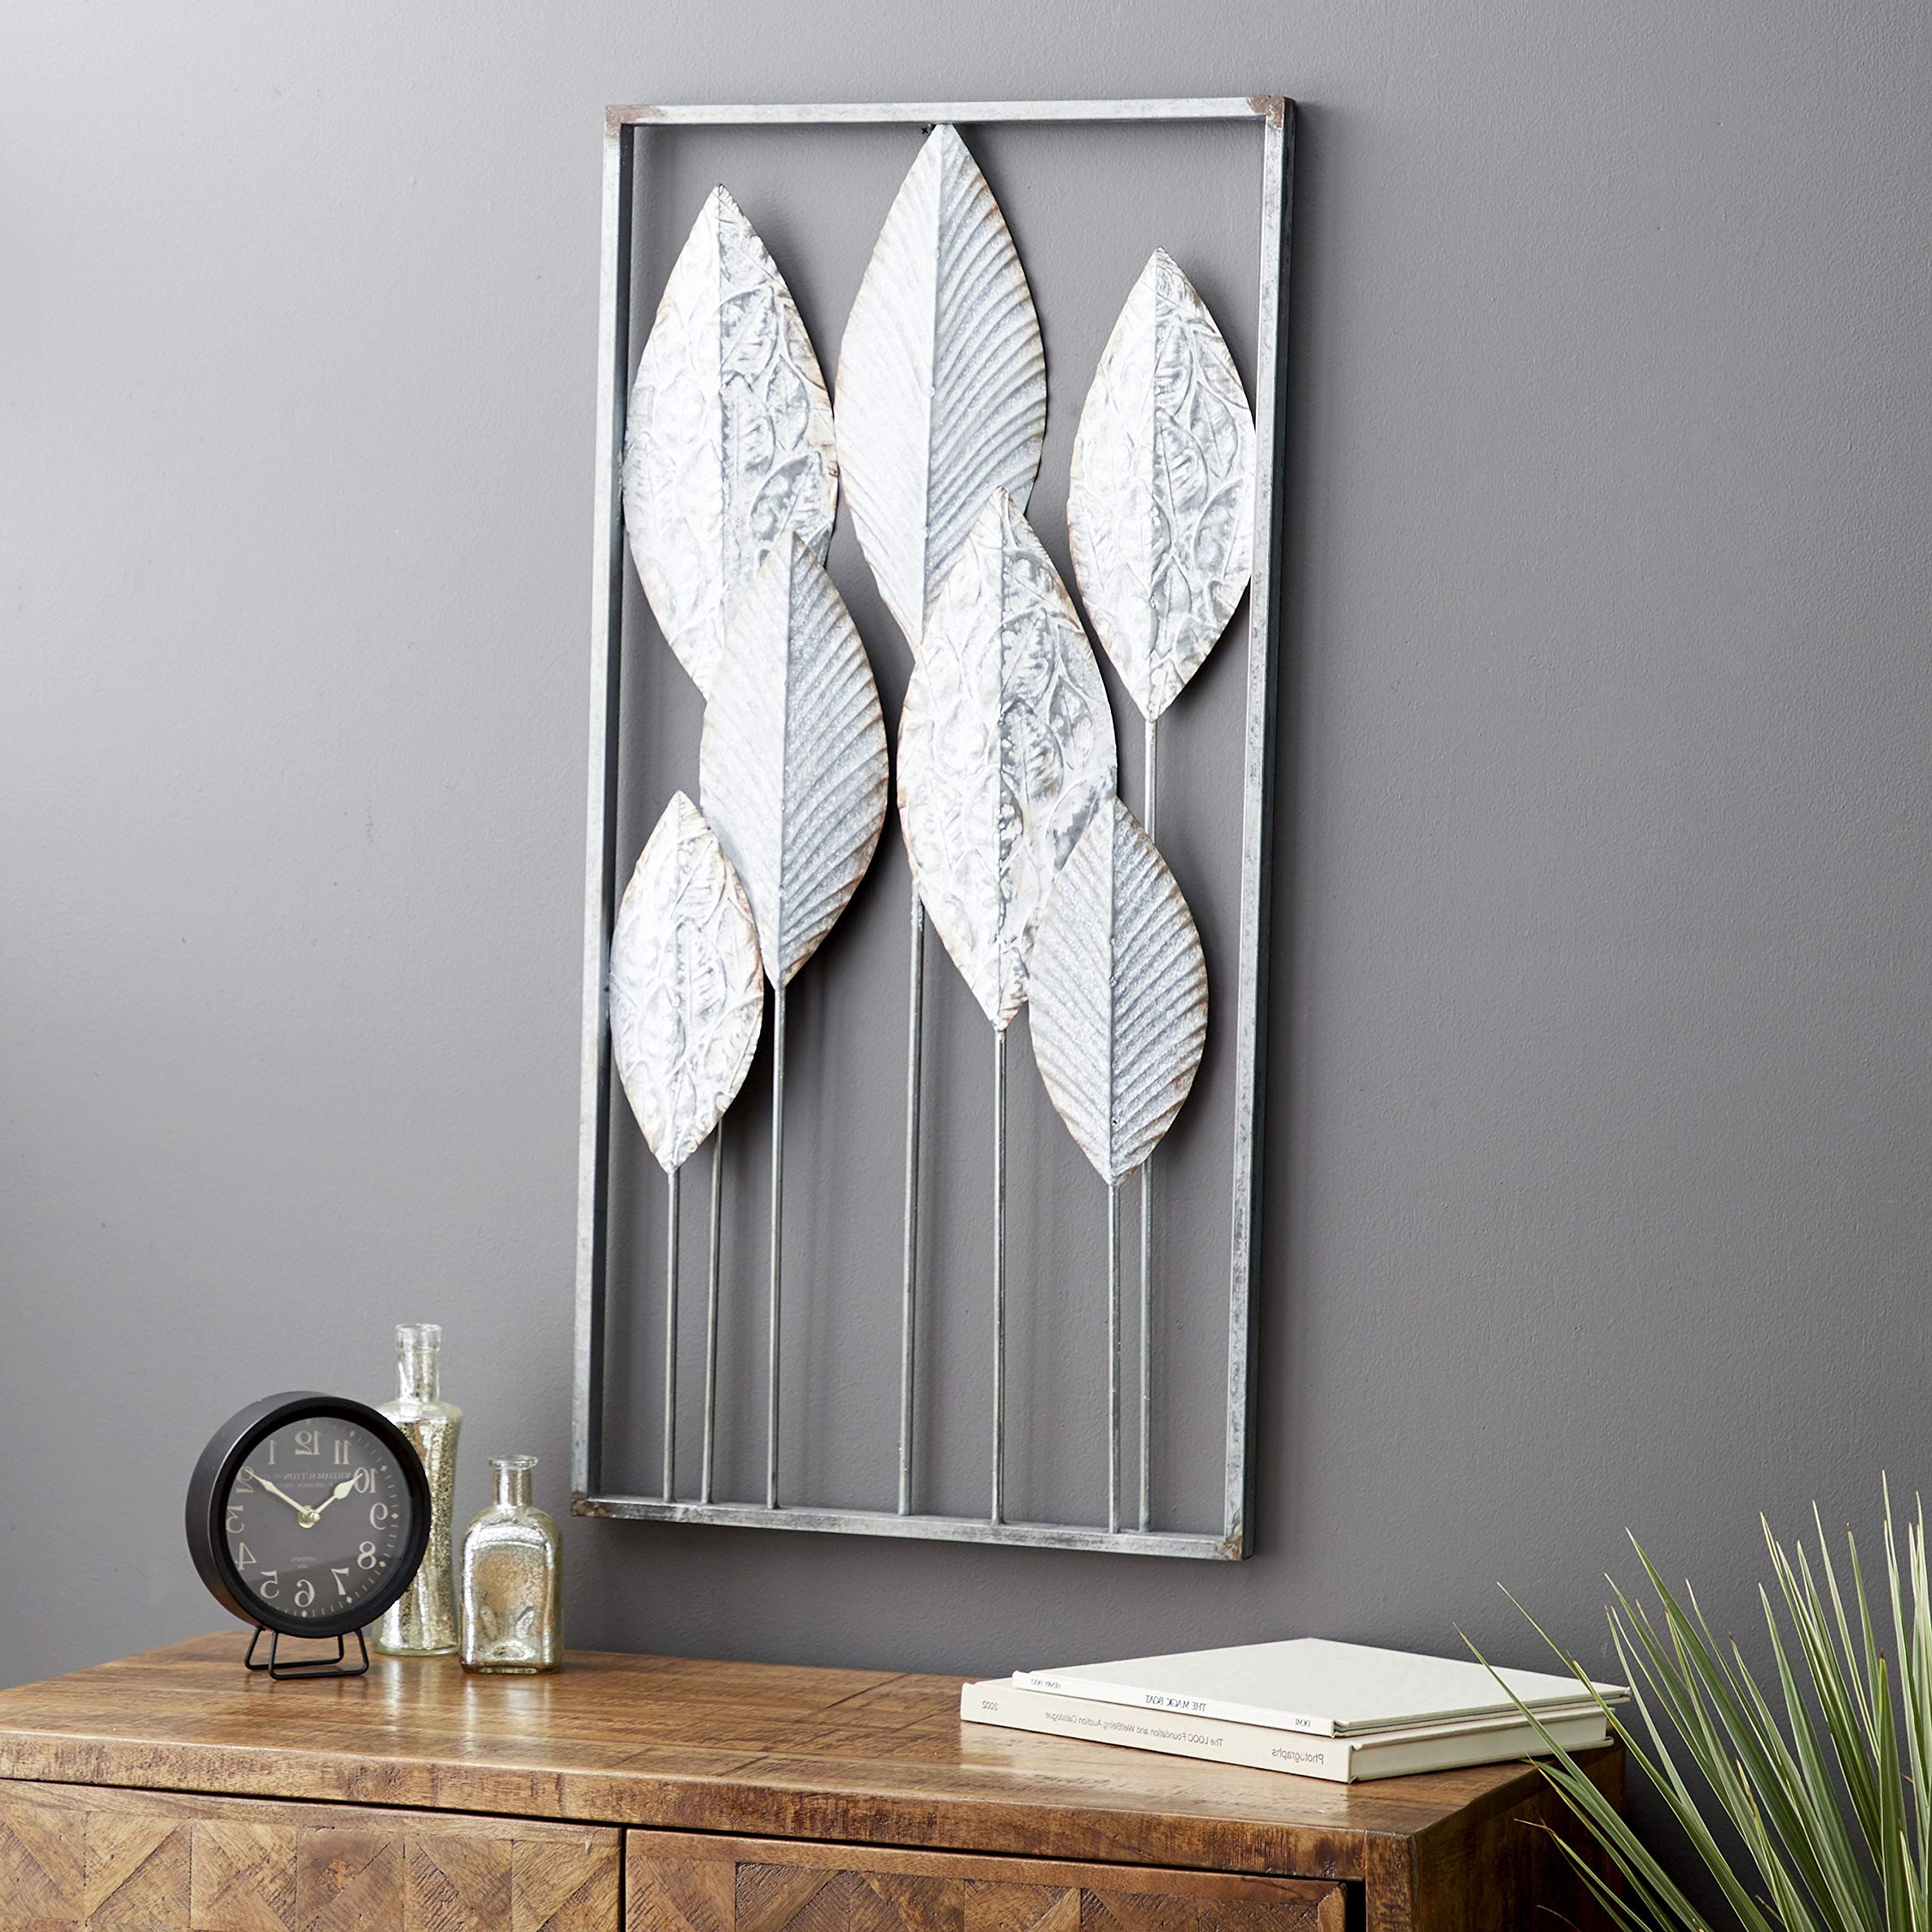 Most Popular Intricate Laser Cut Wall Art Throughout Amazon: Deco 79 Metal Leaf Tall Cut Out Wall Decor With Intricate Laser  Cut Designs, 18" X 2" X 36", Gray : Home & Kitchen (Photo 2 of 15)